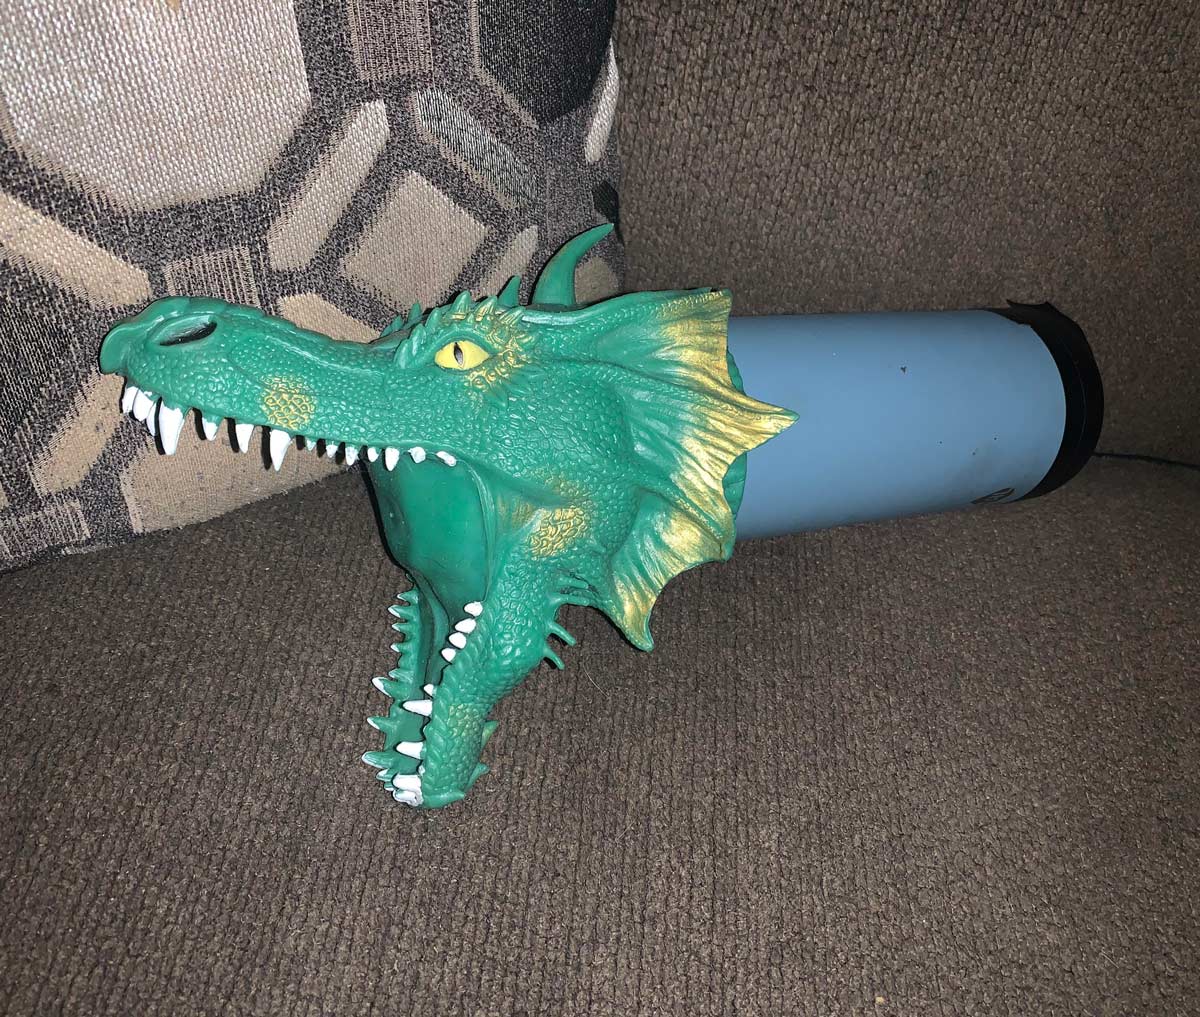 Thought it'd be a good idea to put my dragon hand puppet on an old water bottle and now it just looks like I'm making a fleshlight